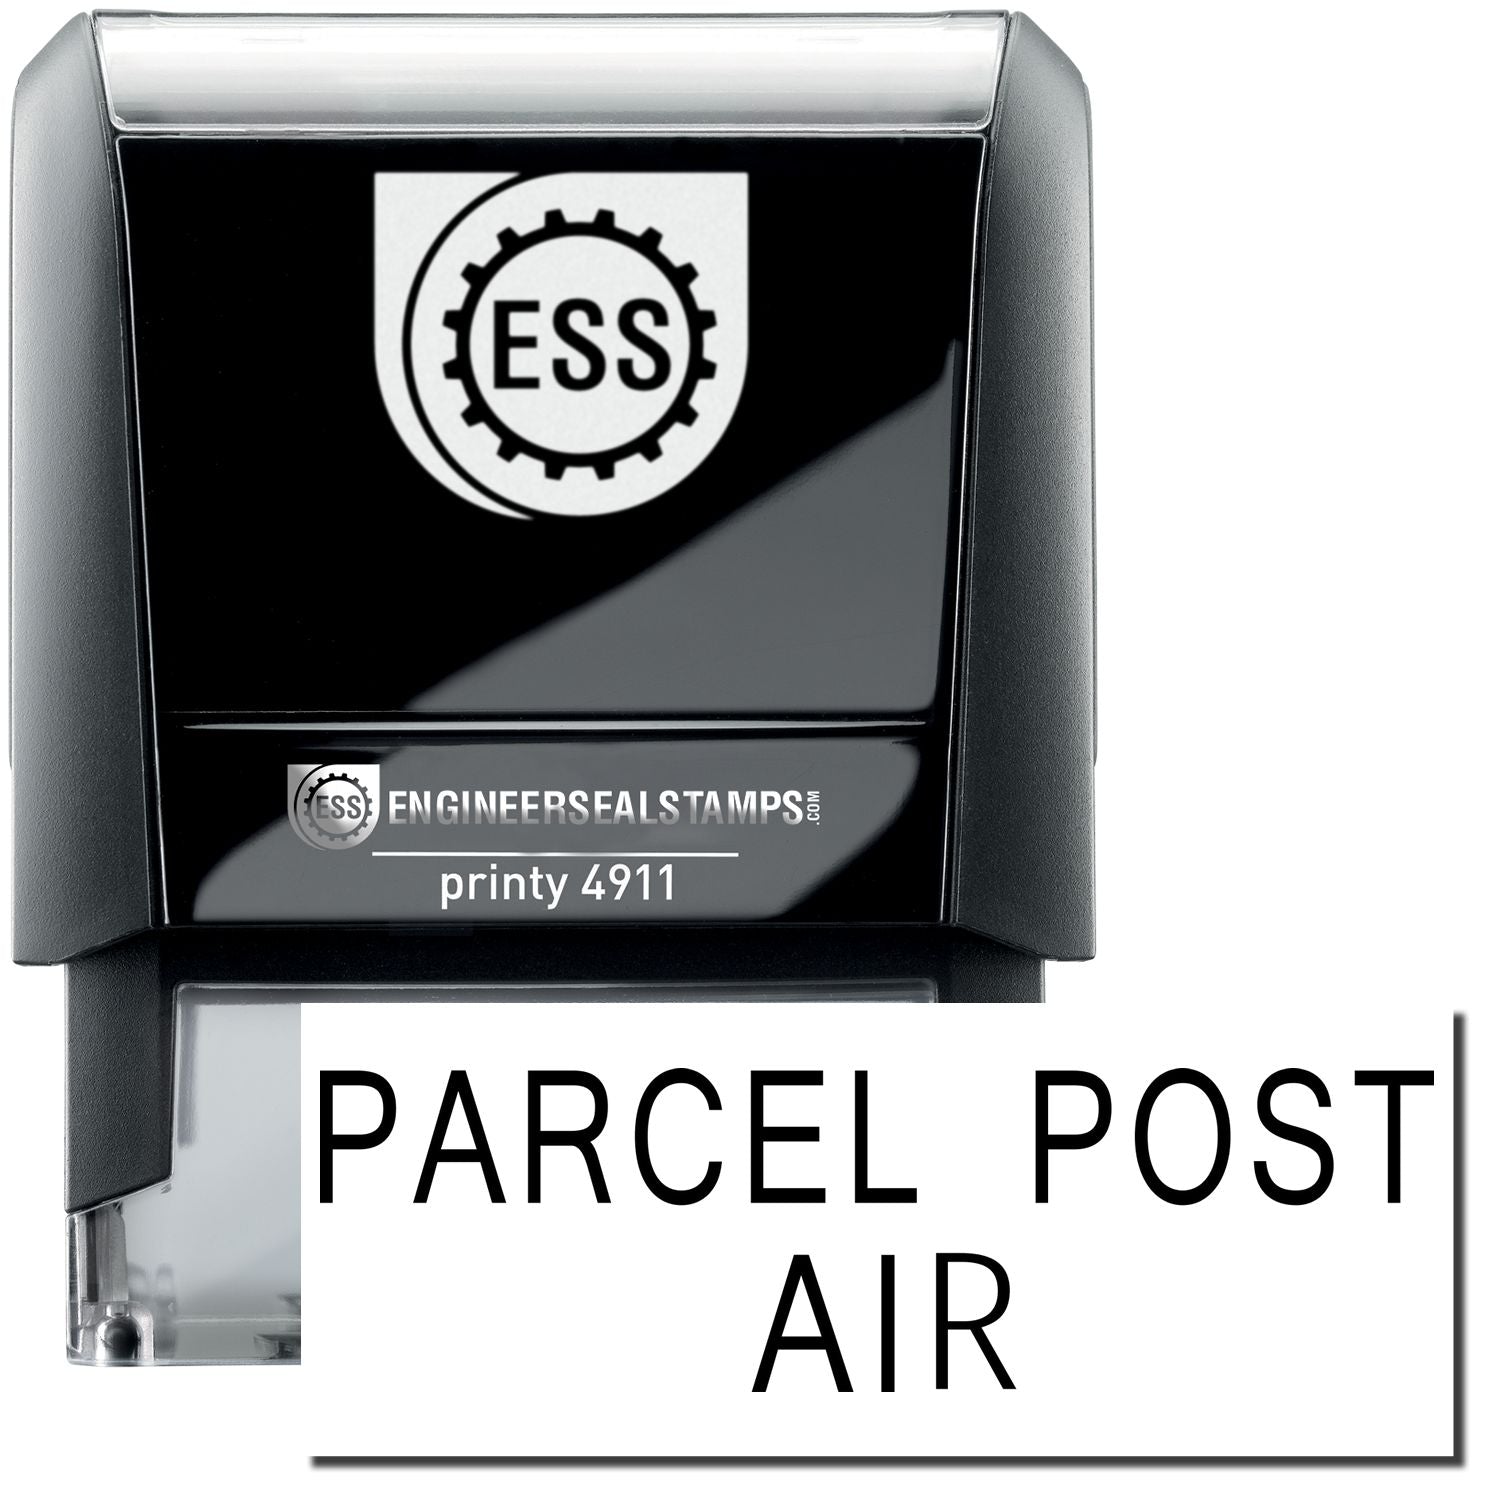 A self-inking stamp with a stamped image showing how the text "PARCEL POST AIR" is displayed after stamping.